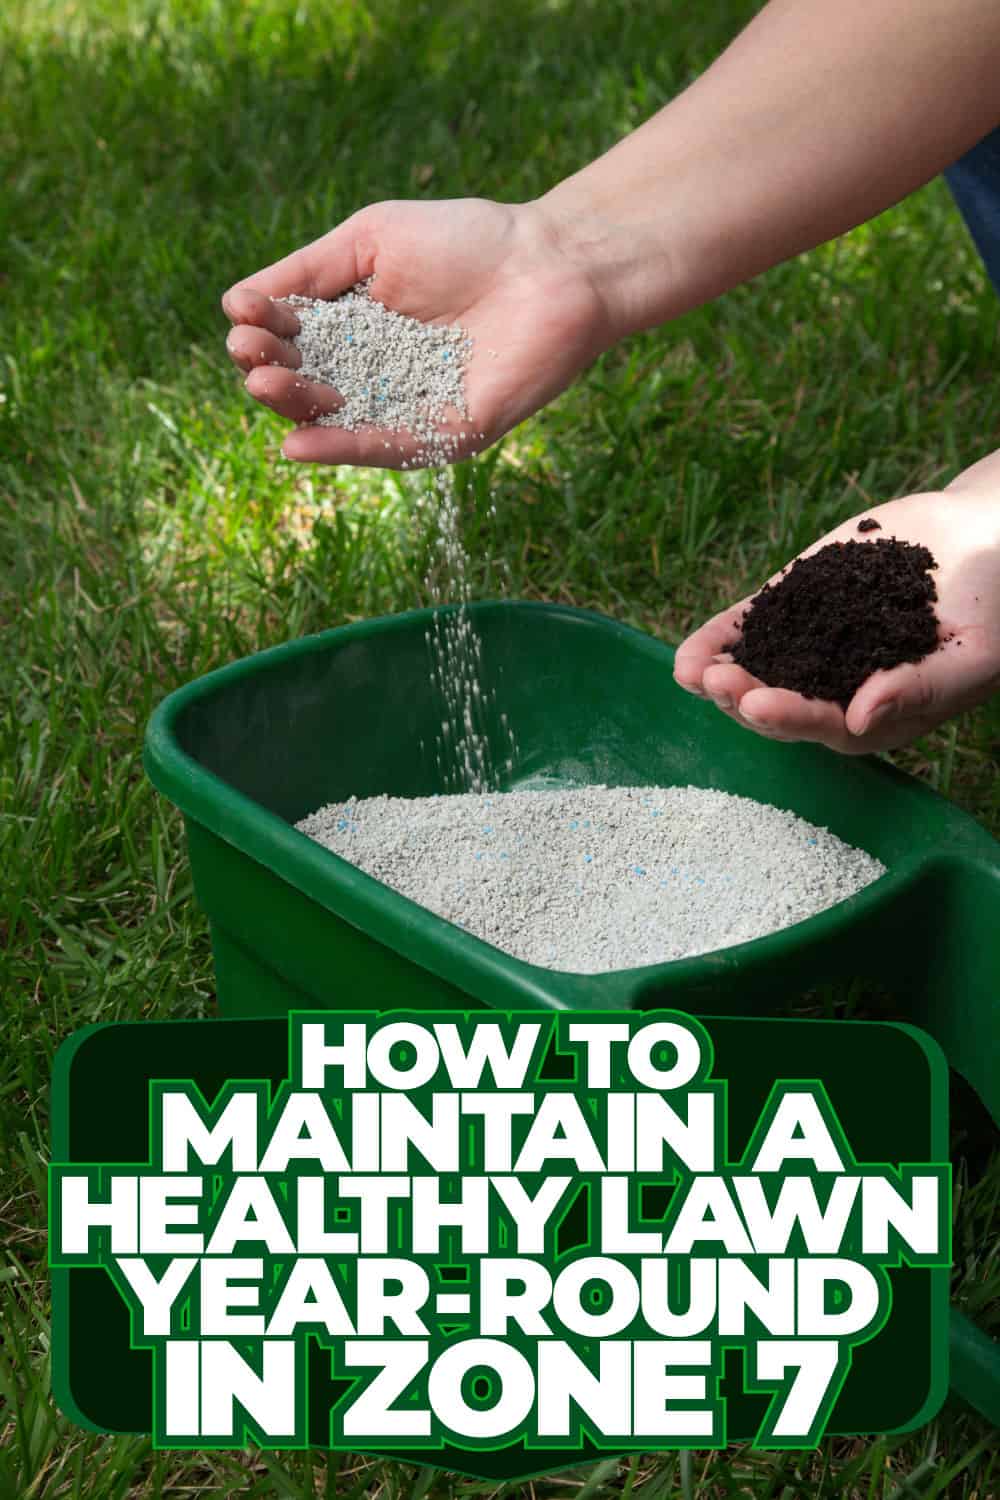 How to Maintain a Healthy Lawn Year-Round in Zone 7